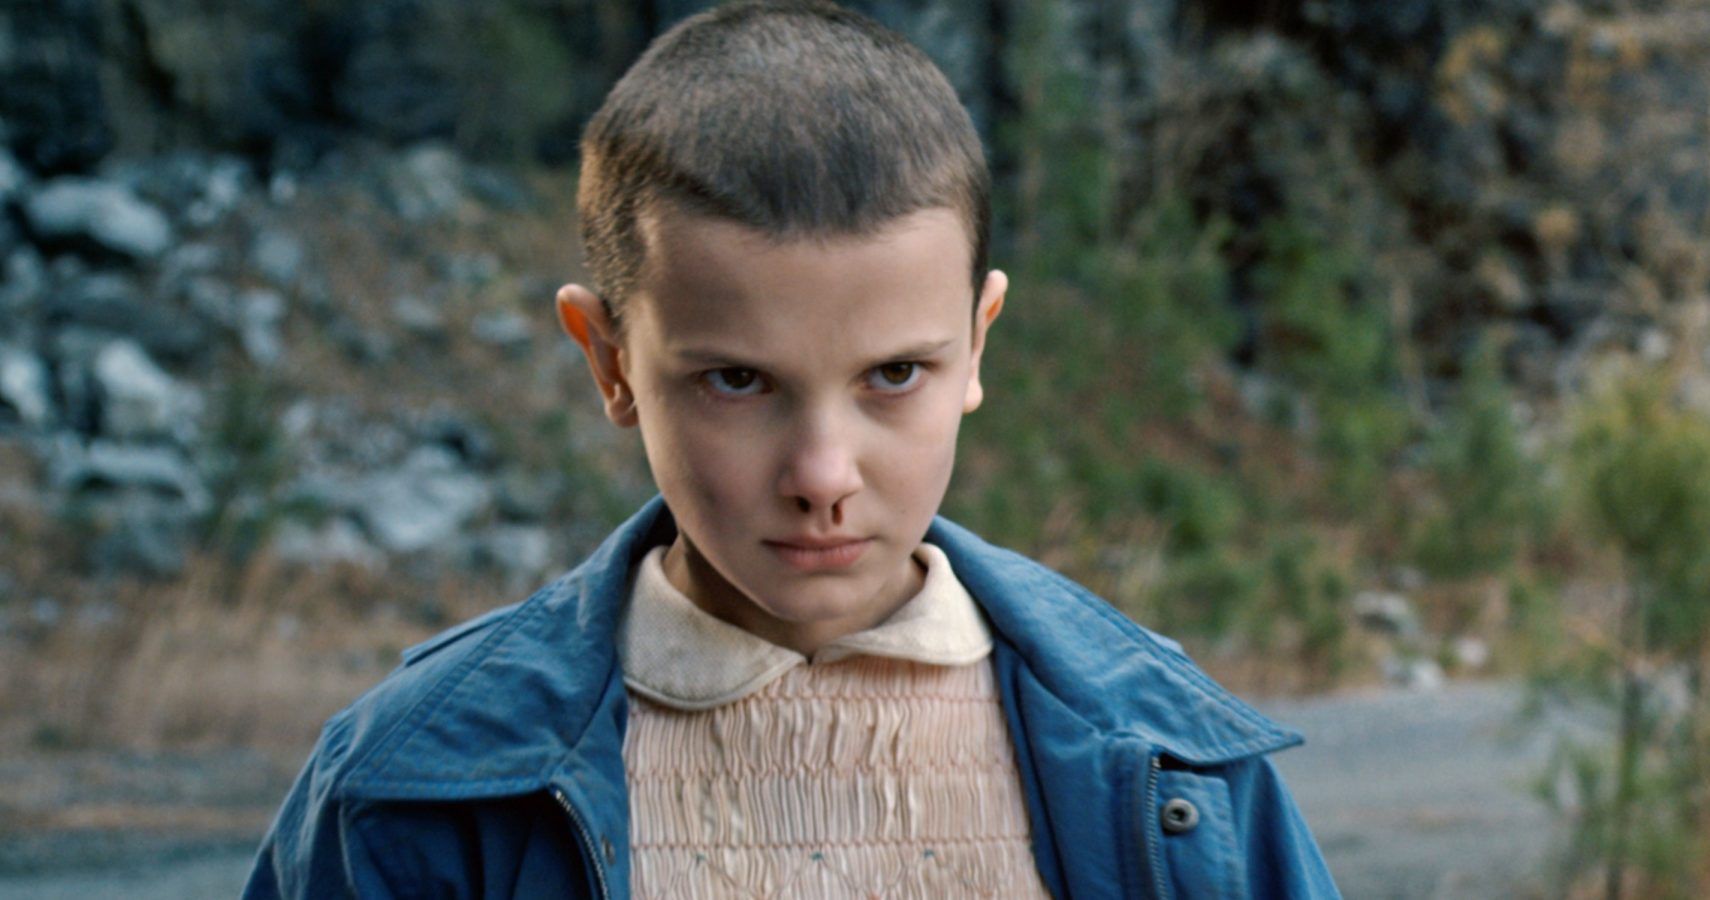 Stranger Things: 5 Biggest Ways Eleven Has Changed From Season 1